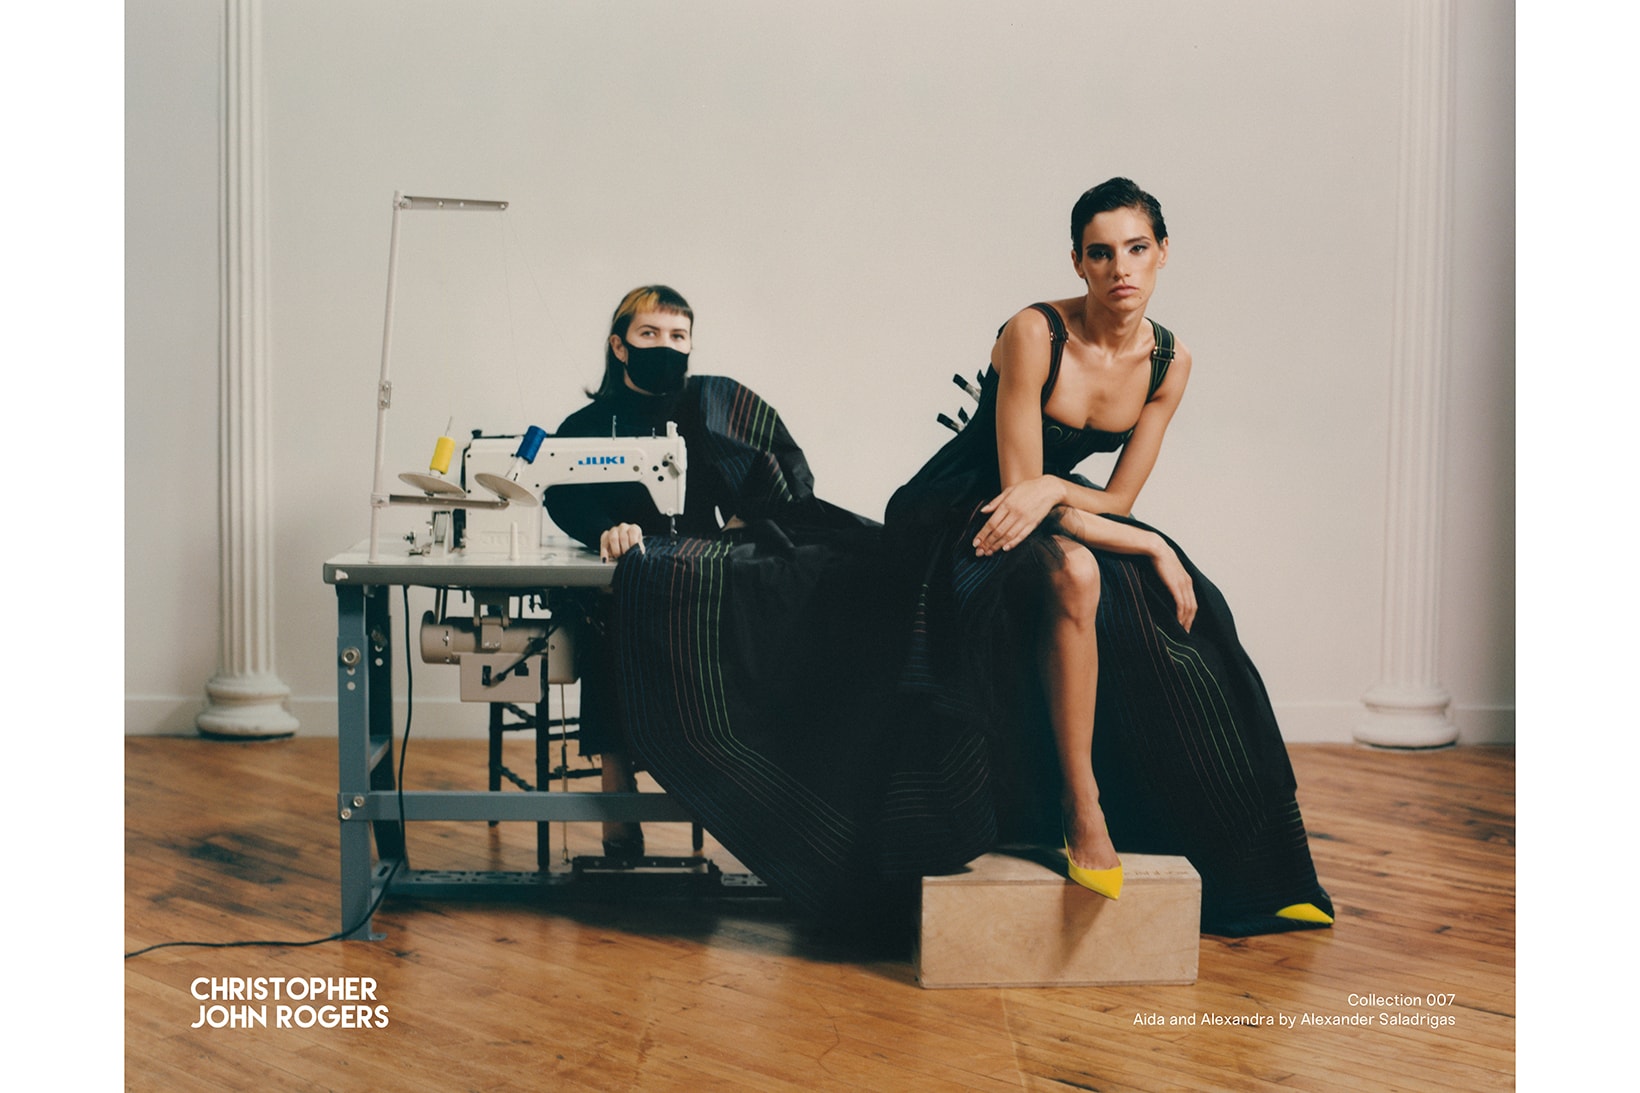 Christopher John Rogers Spring/Summer 2021 Collection Campaign